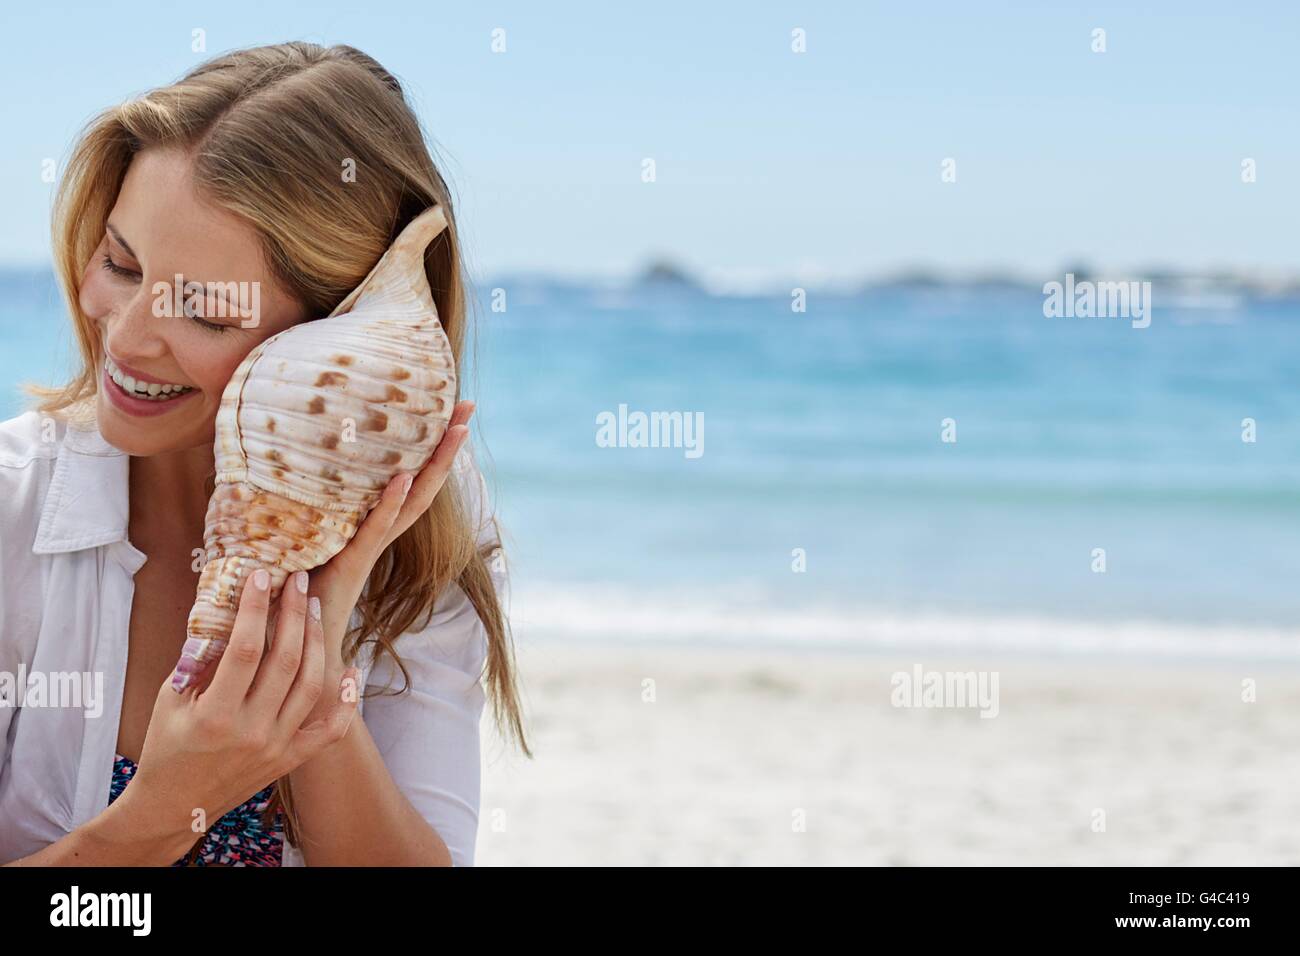 MODEL RELEASED. Young woman listening to a seashell. Stock Photo